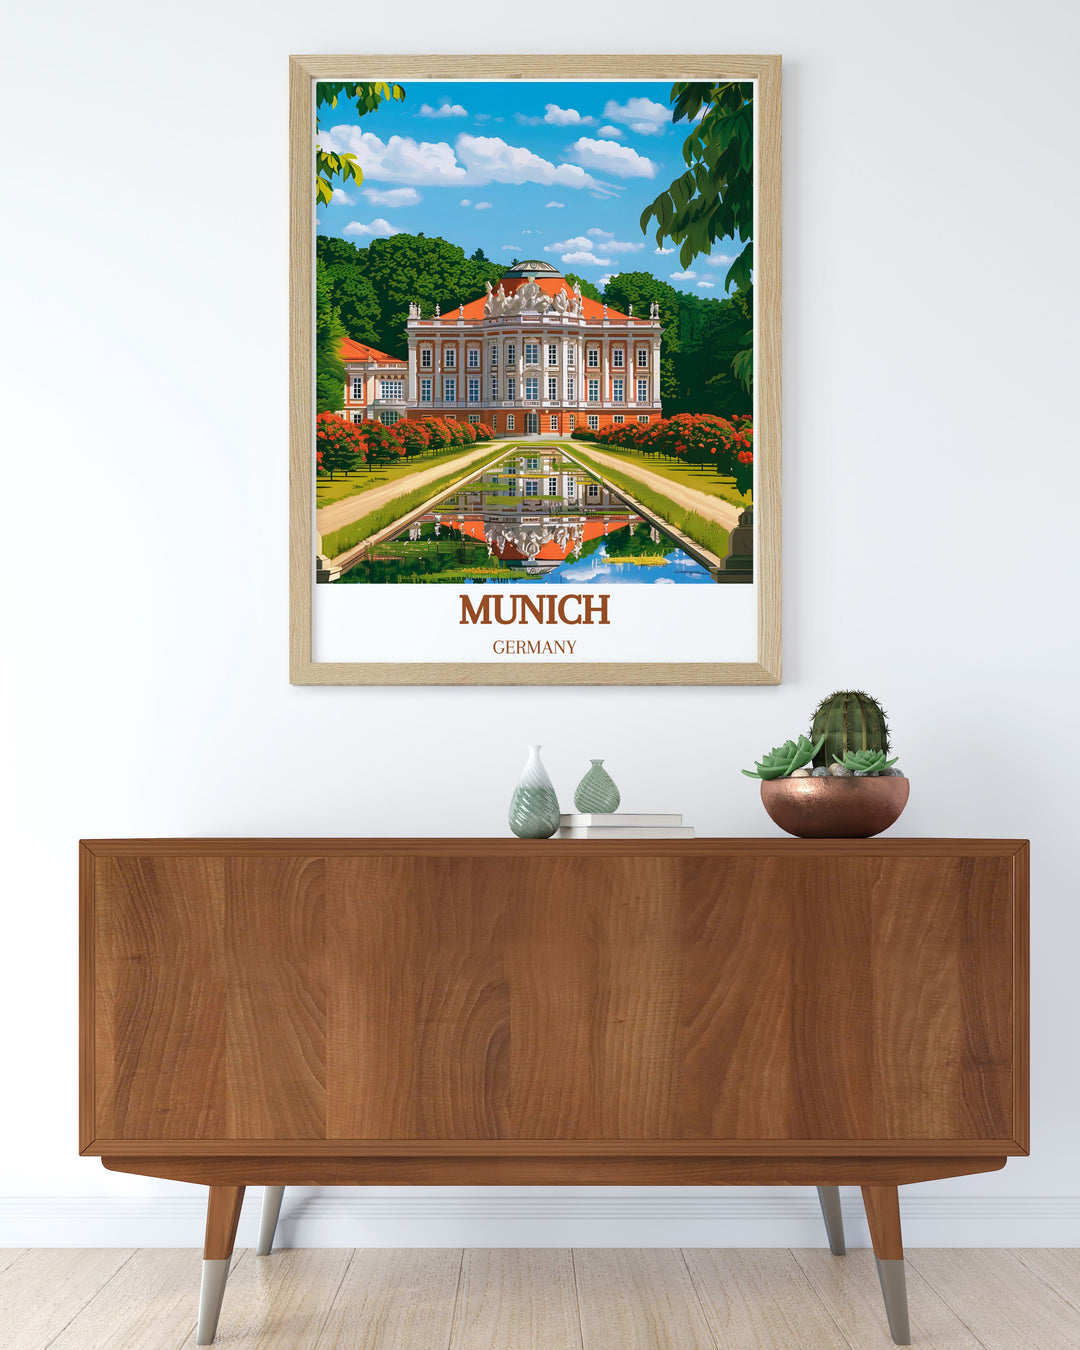 Elegant Munich Wall Art featuring GERMANY Nymphenburg Palace capturing the grandeur of this iconic landmark perfect for home decor Germany photography collections and travel enthusiasts makes a thoughtful and unique gift for any occasion including anniversary gifts